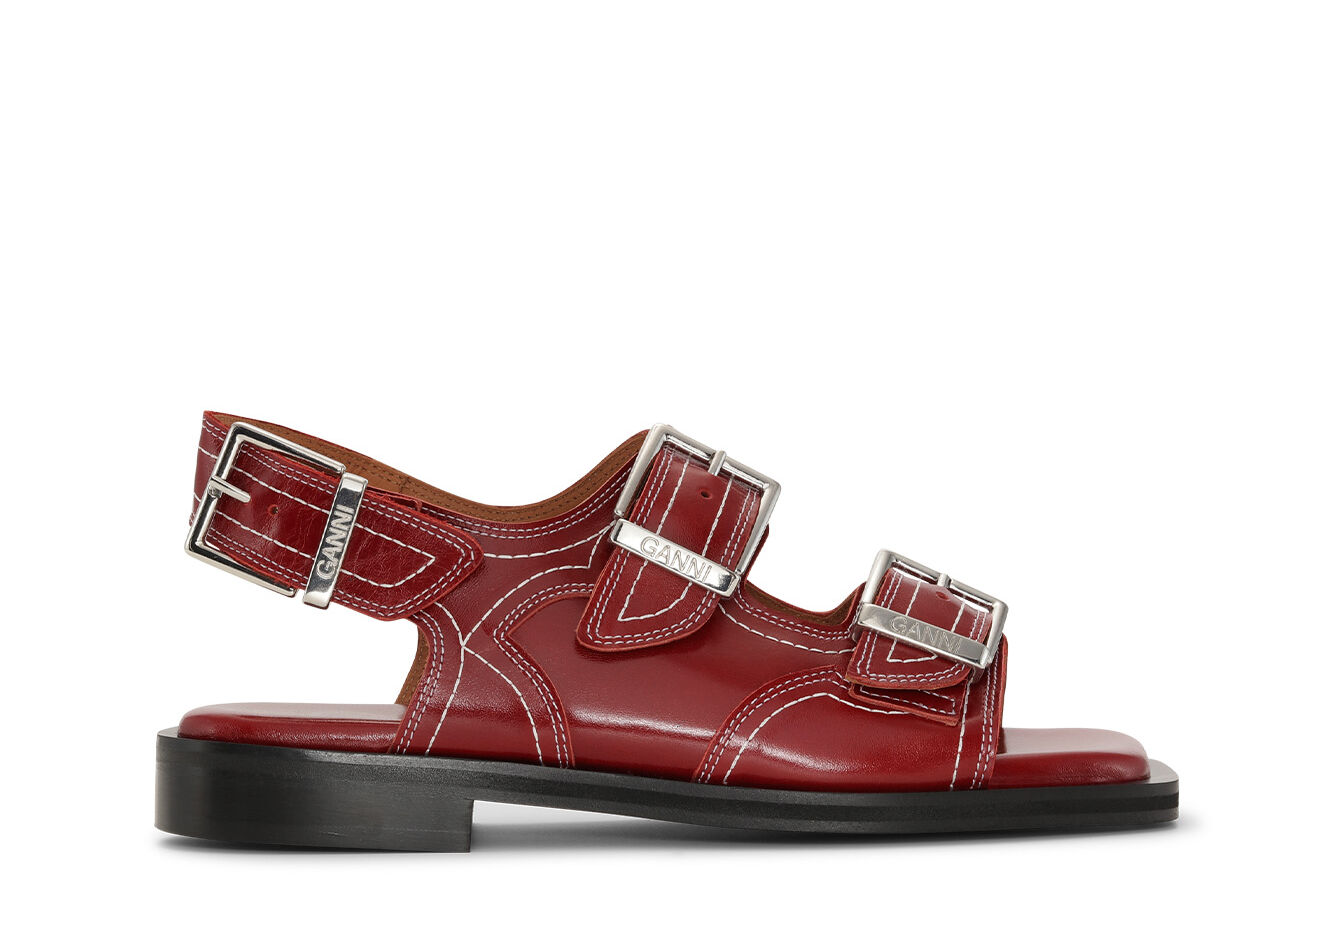 Embroidered Western Sandals, Calf Leather, in colour Barbados Cherry - 1 - GANNI